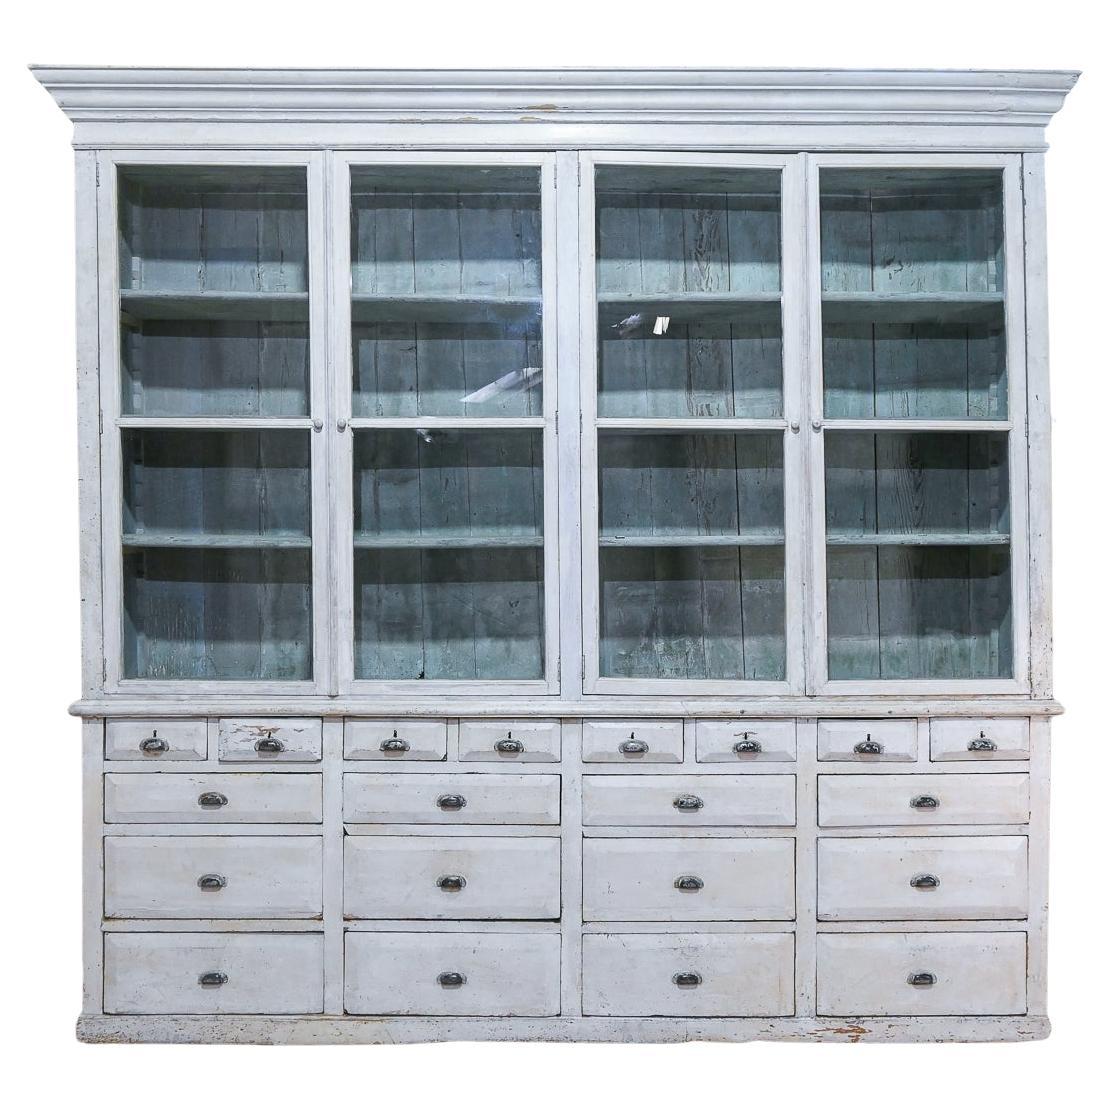 A Large Scale 19th Century French Painted Glazed Bibliothèque Cabinet - Bookcase For Sale